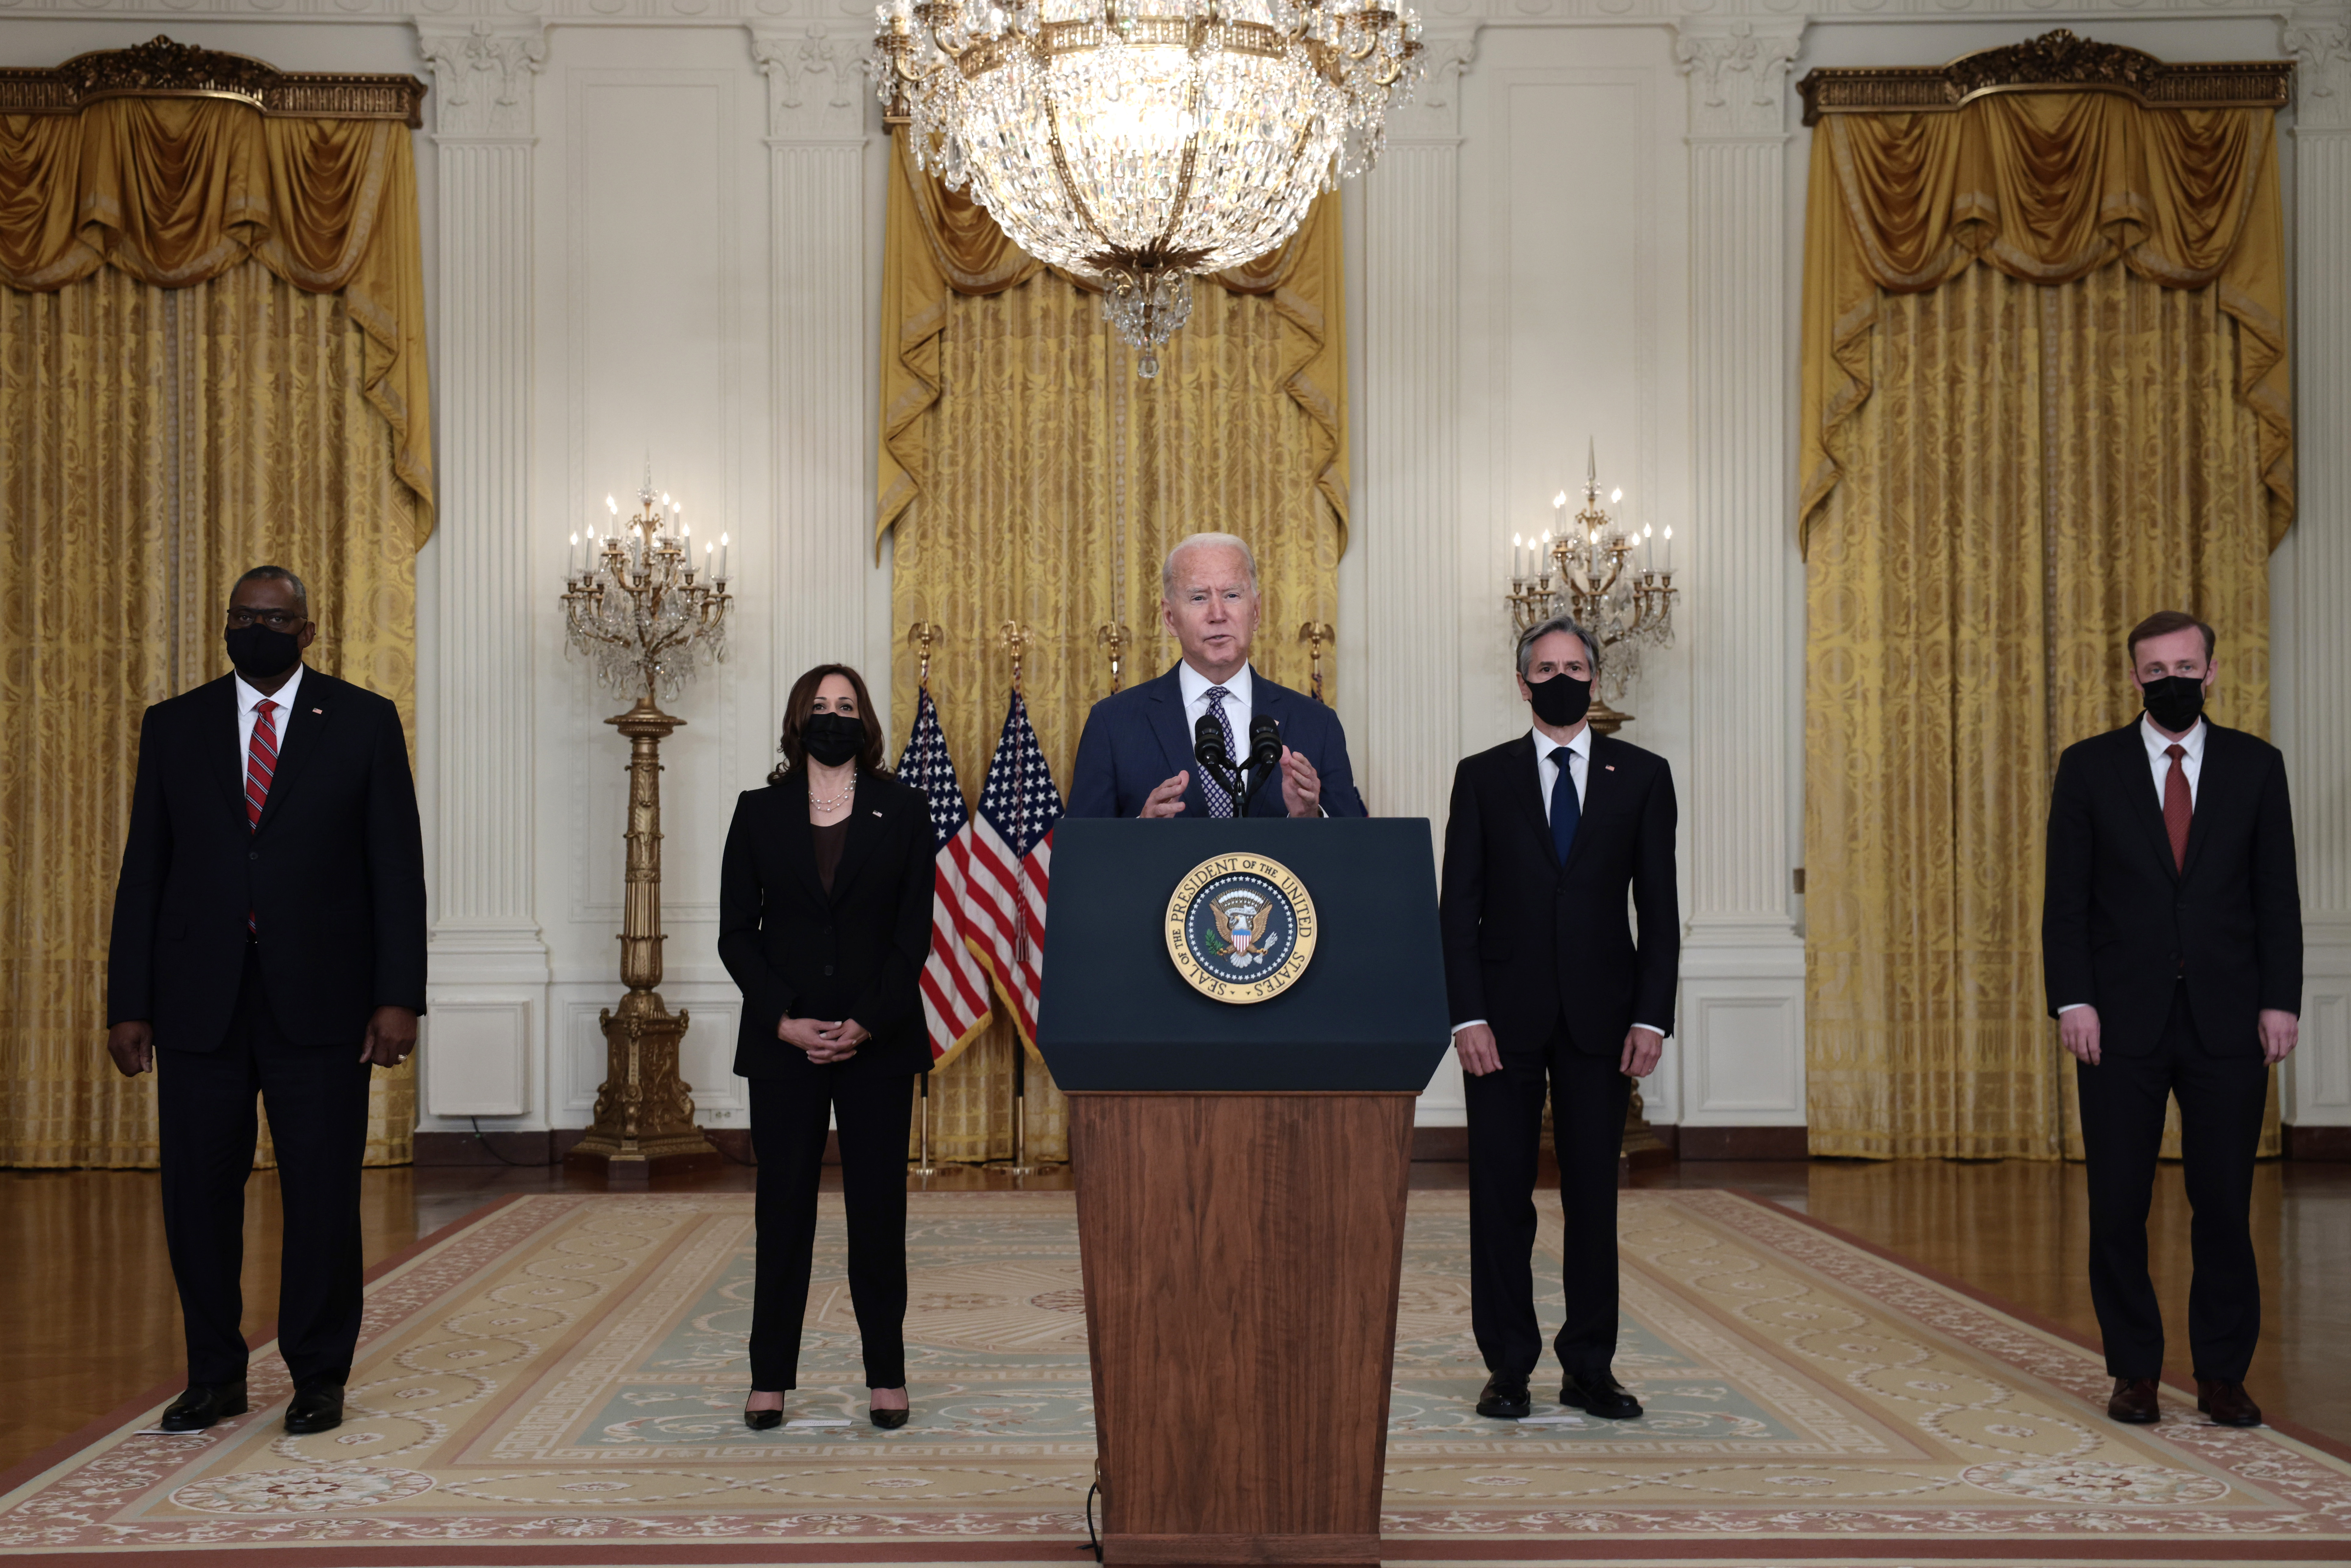 U.S. President Joe Biden delivers remarks on the U.S. military’s ongoing evacuation efforts in Afghanistan as he is joined by (L-R) U.S. Secretary of Defense Lloyd Austin, U.S. Vice President Kamala Harris, Secretary of State Antony Blinken, and White House National Security Advisor Jake Sullivan from the East Room of the White House on August 20, 2021 in Washington, DC. The White House announced earlier that the U.S. has evacuated almost 14,000 people from Afghanistan since the end of July. (Photo by Anna Moneymaker/Getty Images)